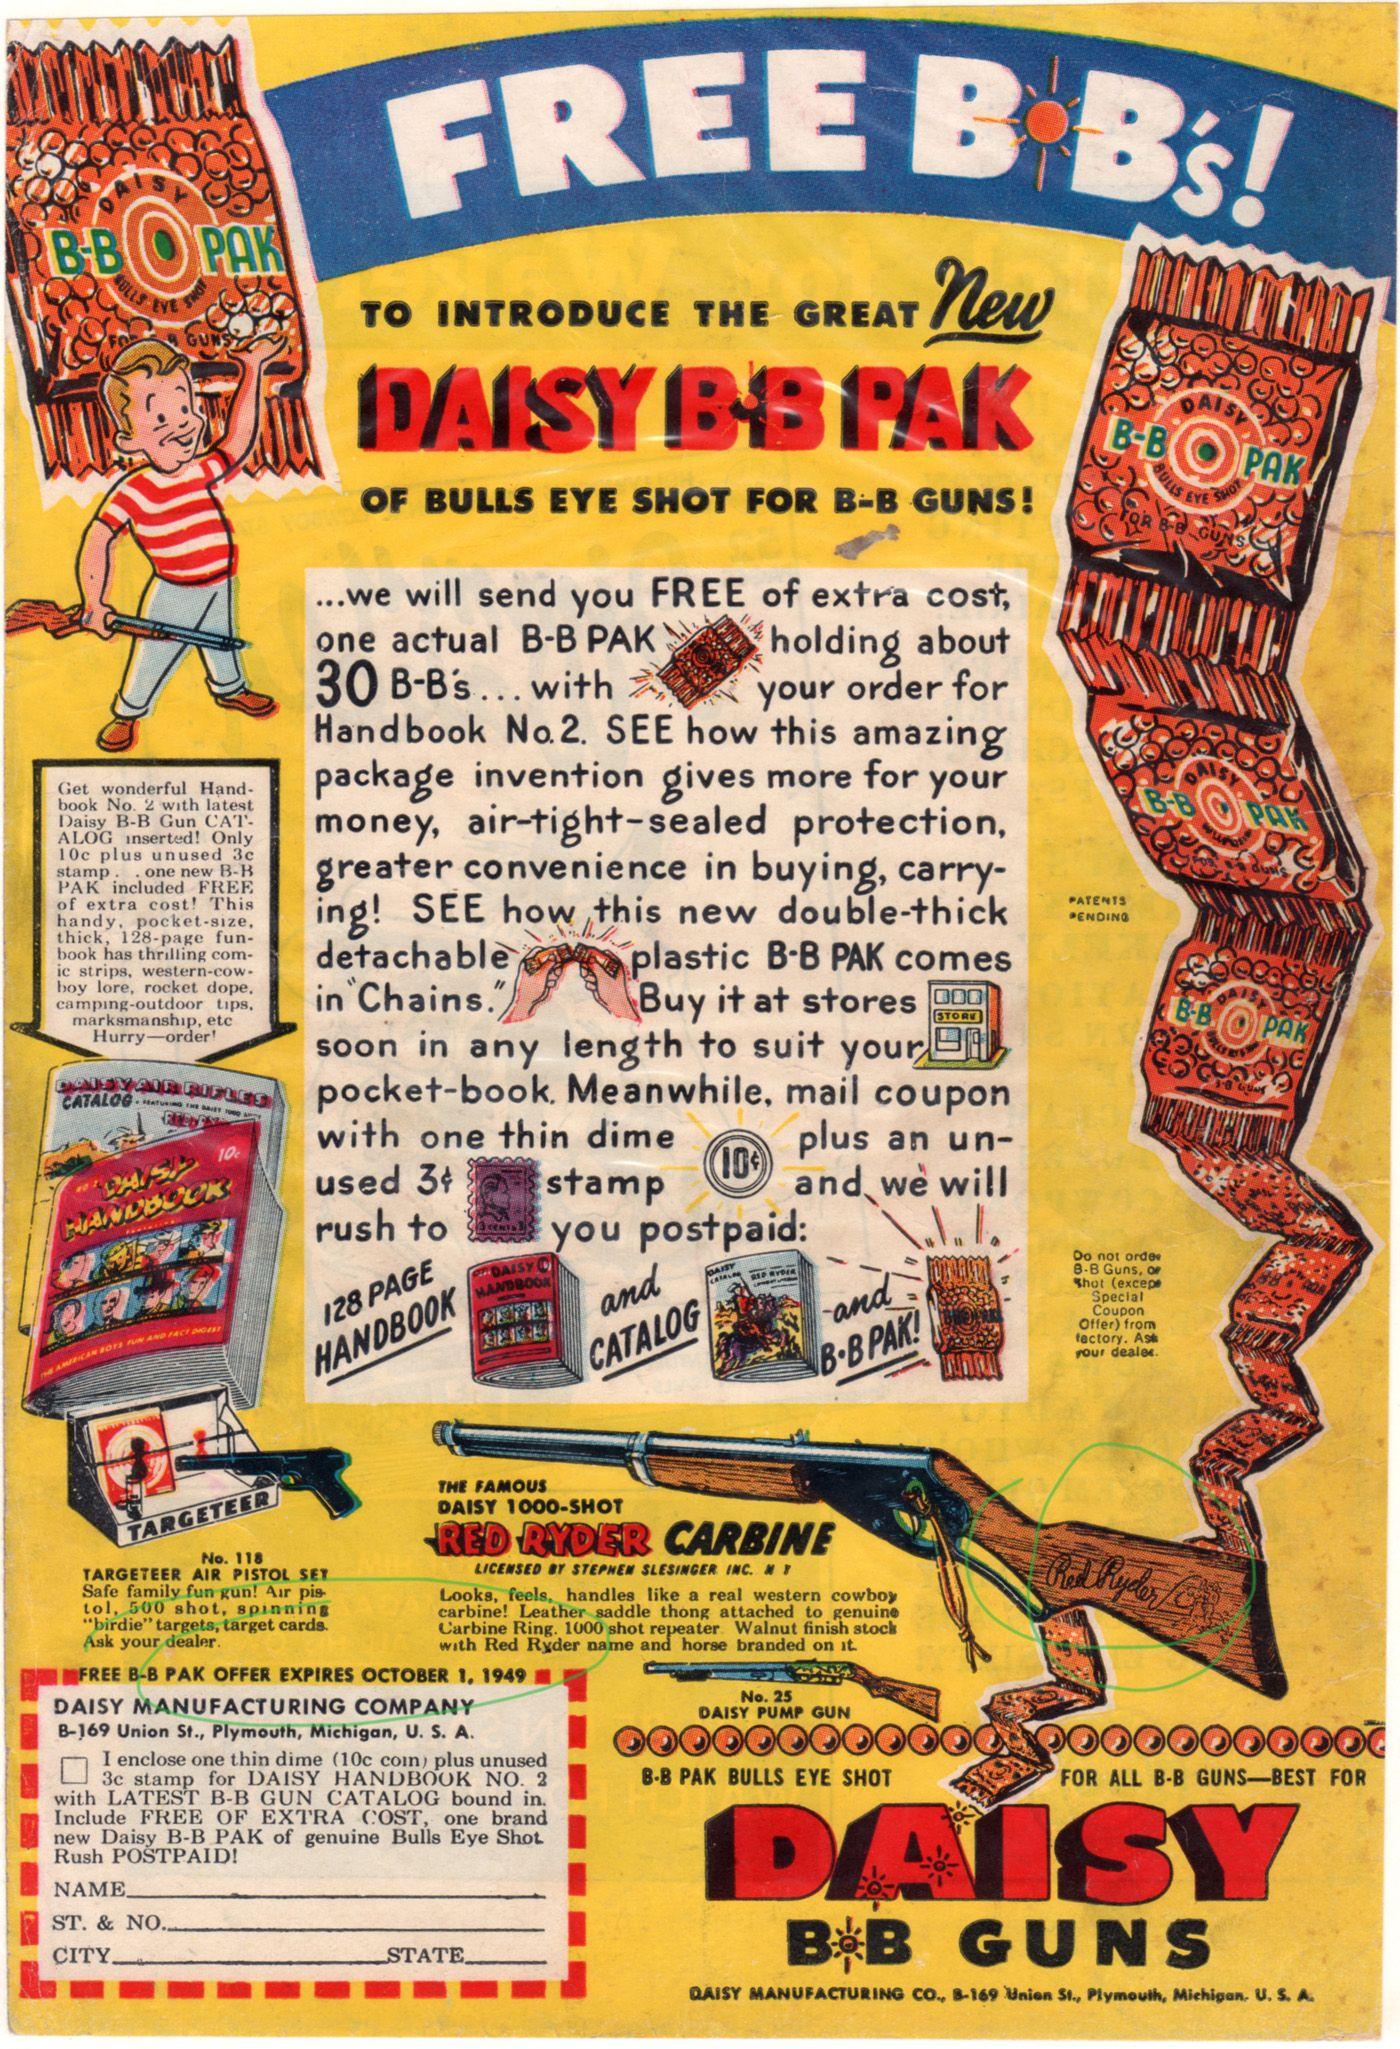 Red Ryder Logo - Red Ryder Lariat Logo 1949BB Ad sml - AY Mag - AY Is About You